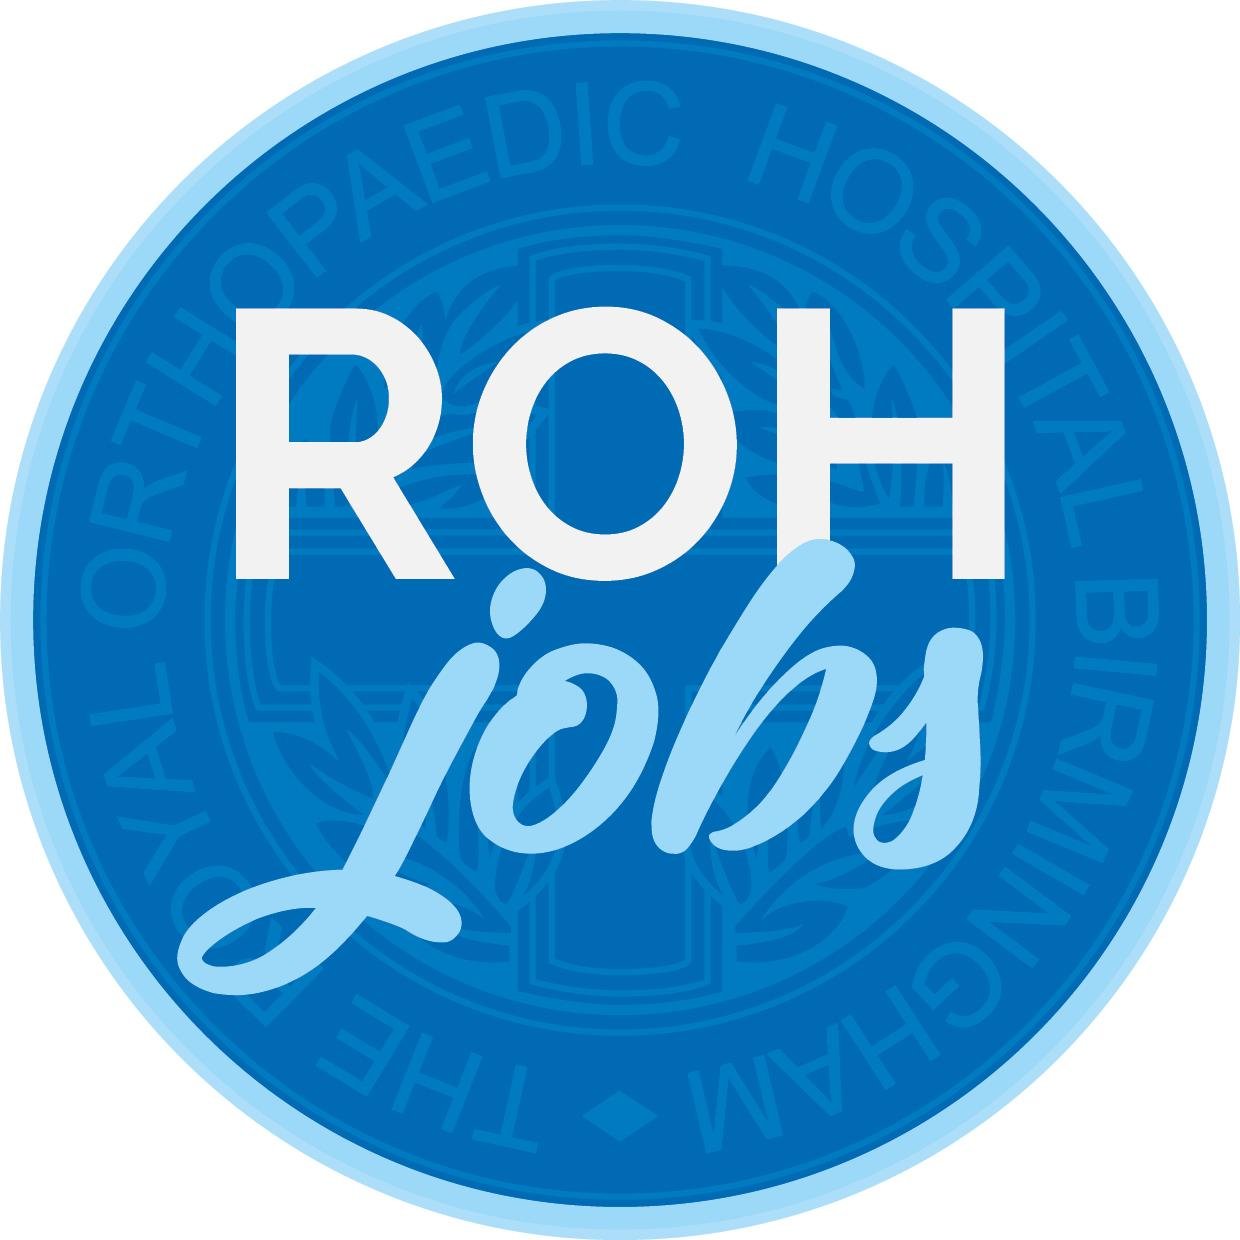 Find the latest jobs from The Royal Orthopaedic Hospital NHS Foundation Trust here. Join #TeamROH and work in a place that cares as much as you do. #LoveROH